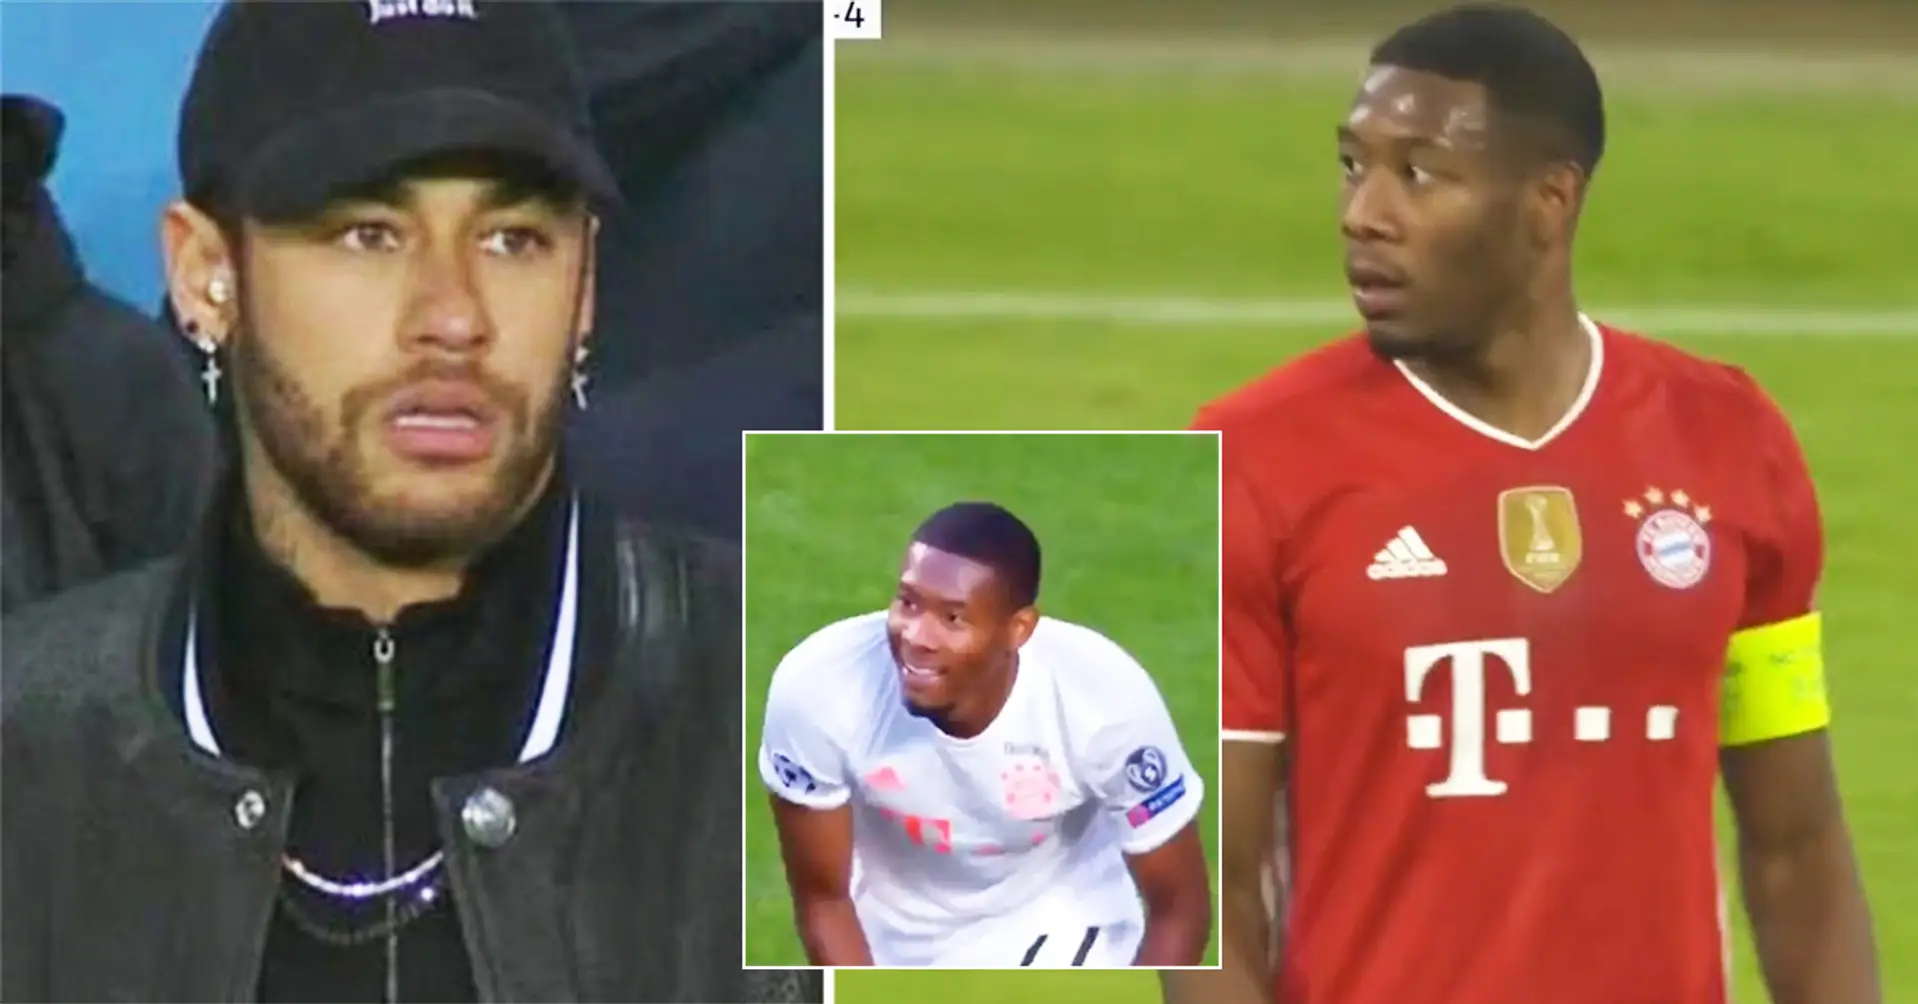 'He declined huge offer'. Two European superclubs David Alaba already rejected have been revealed